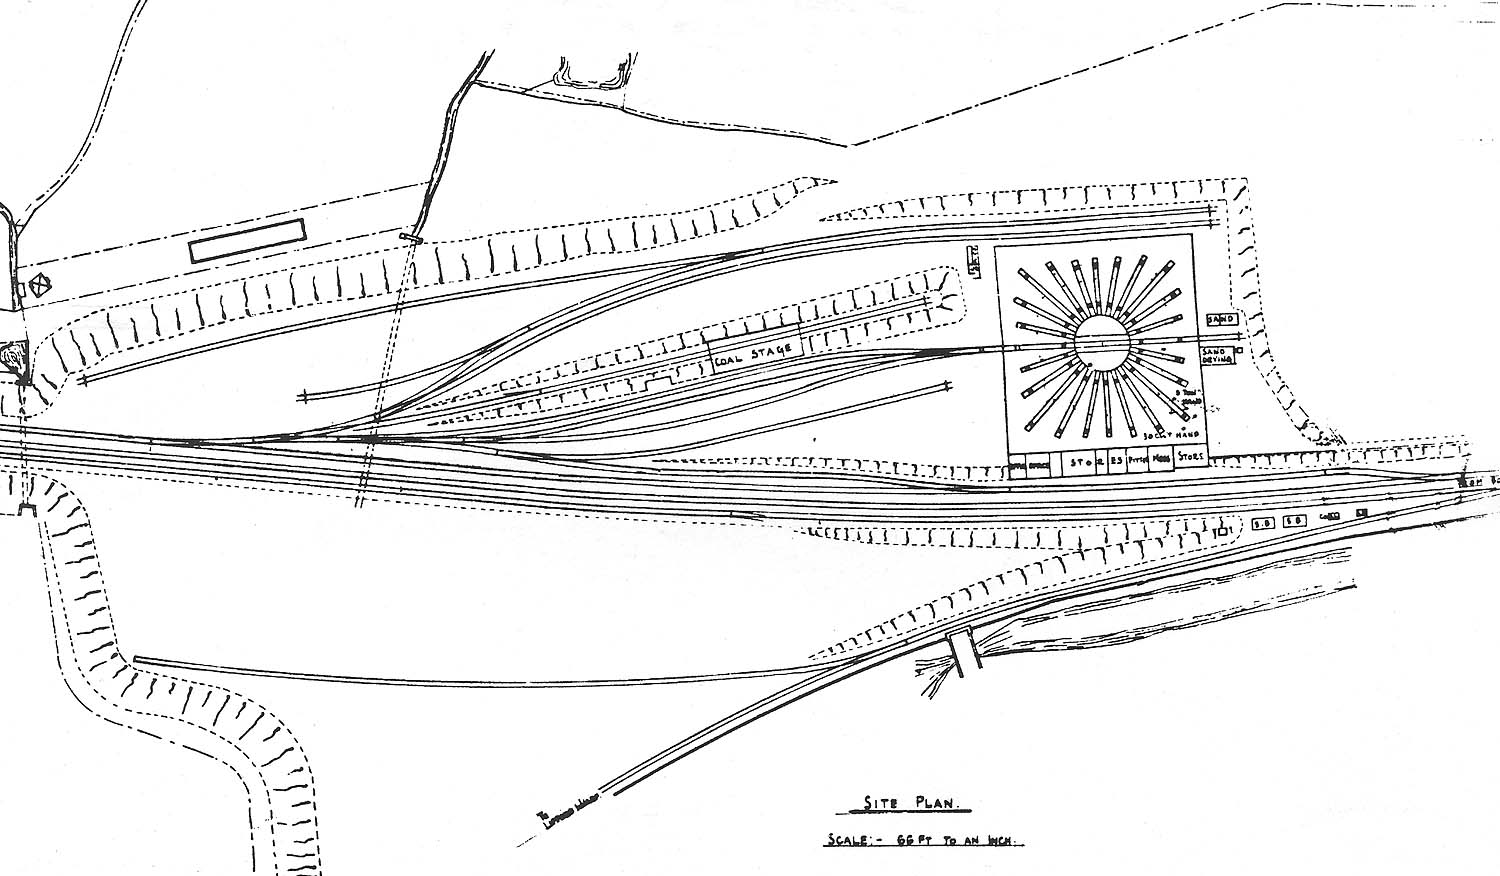 An undated schematic plan at one inch to sixty-six feet scale showing the layout of Bournville shed and yard